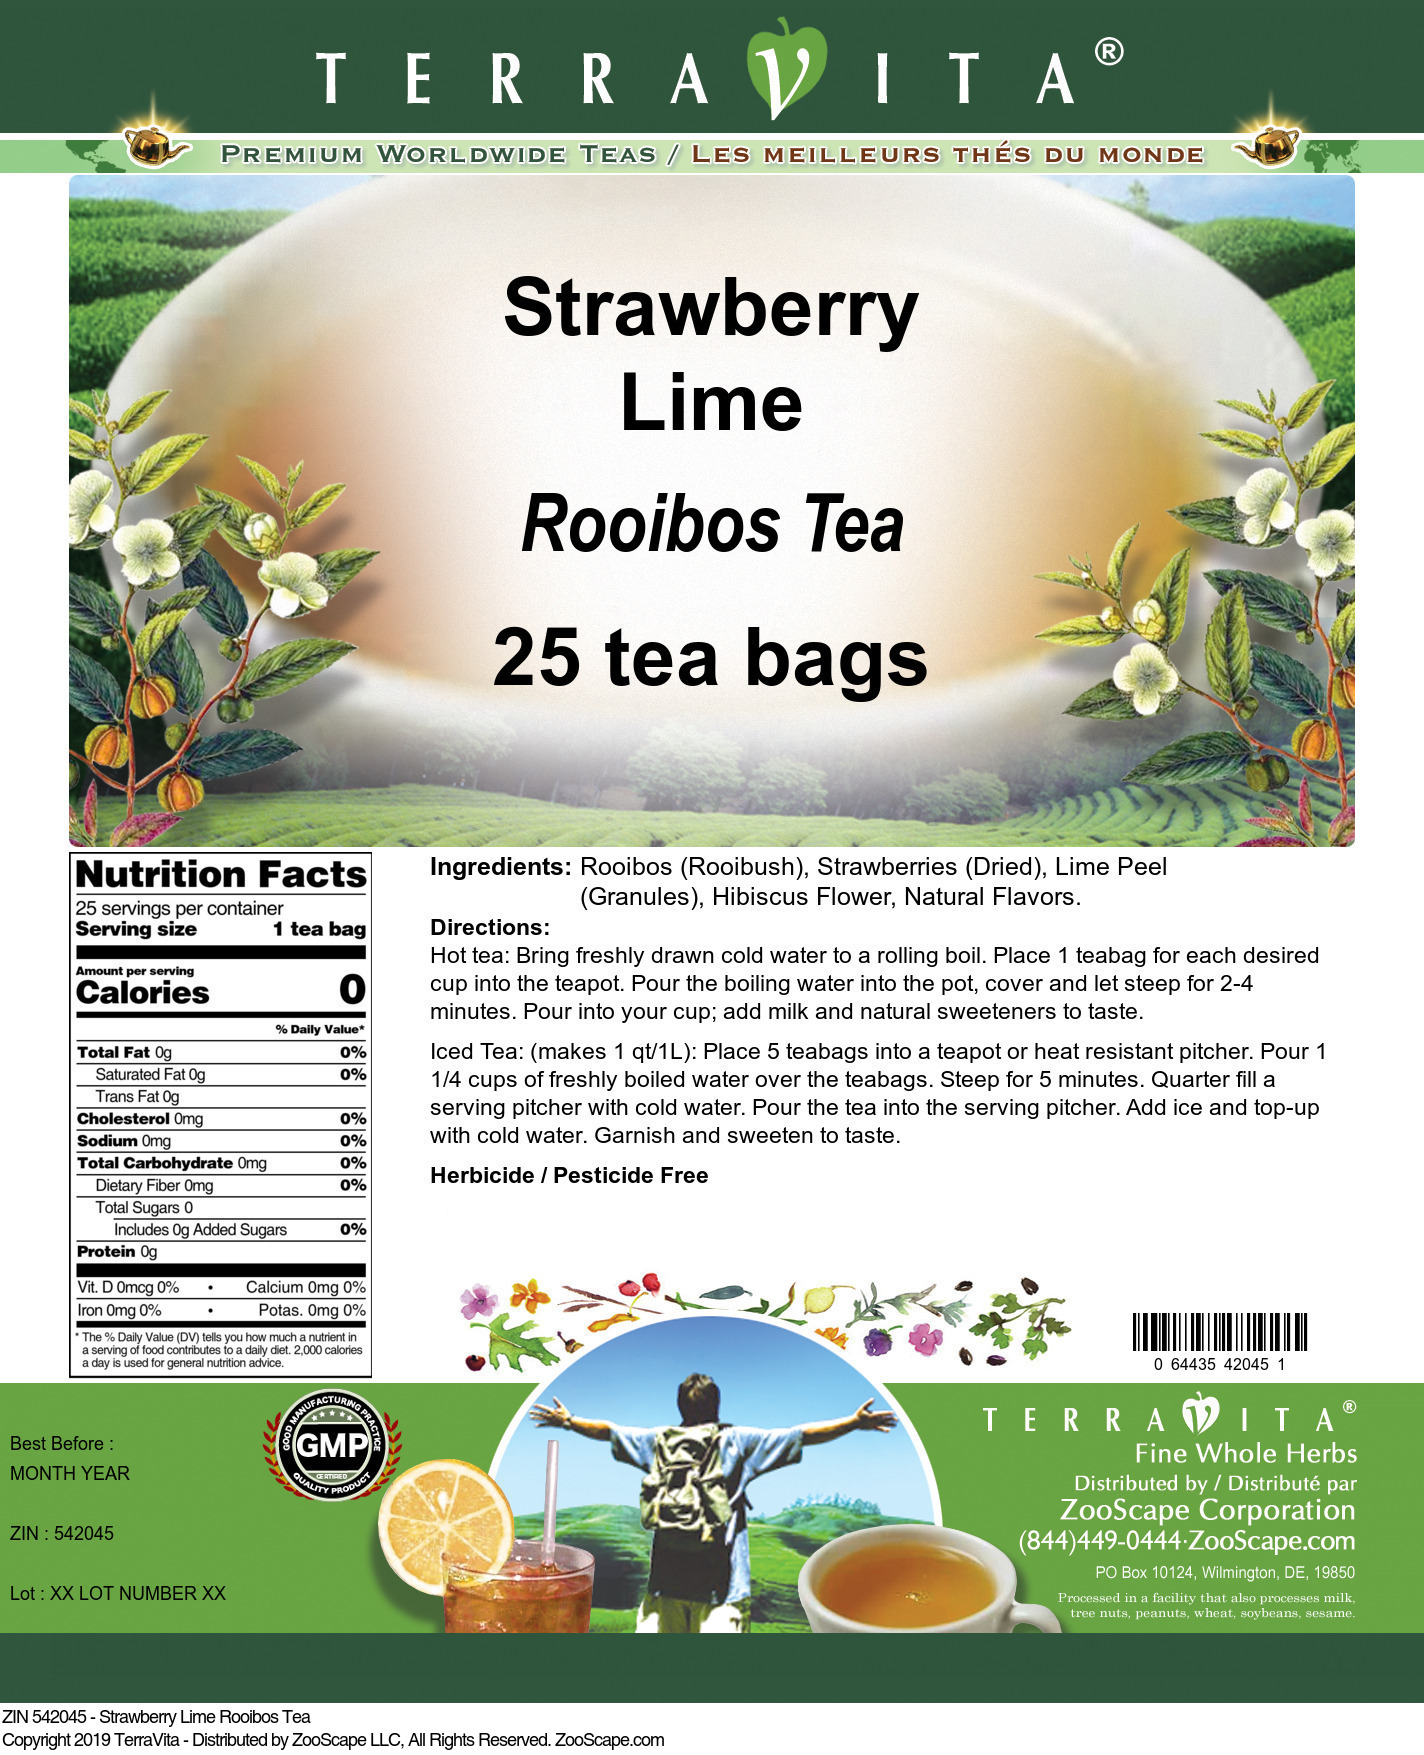 Strawberry Lime Rooibos Tea - Label